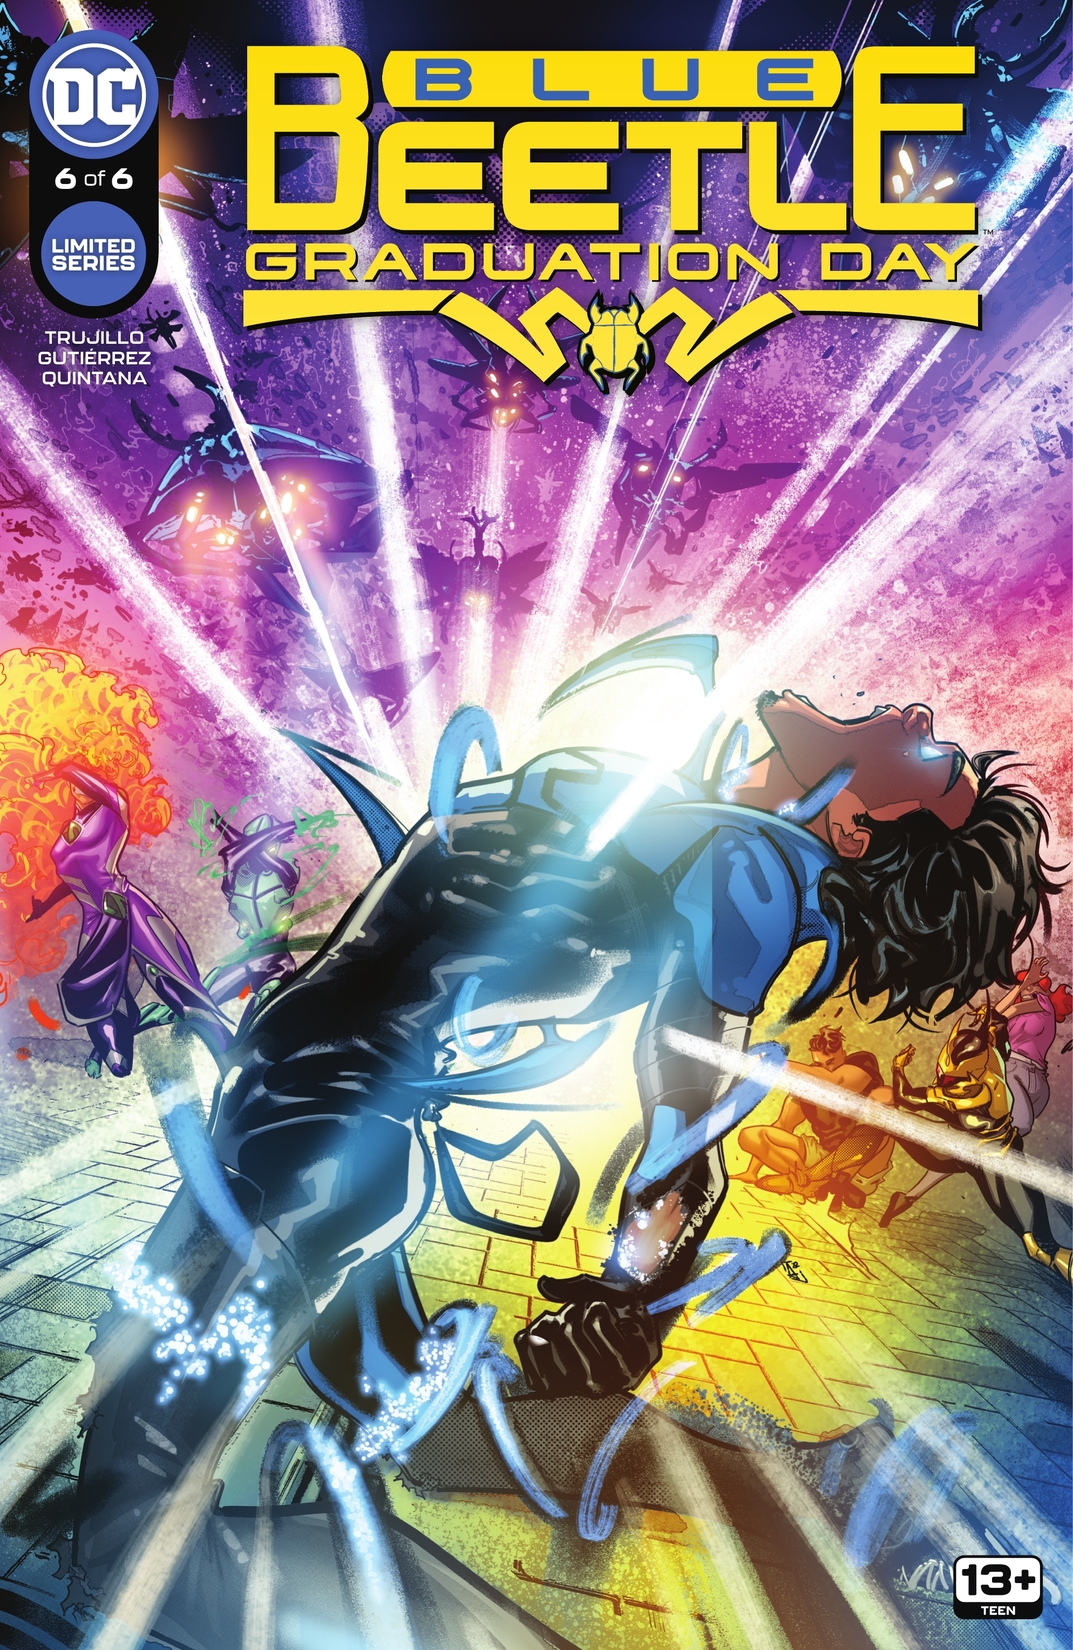 Blue Beetle: Graduation Day #6 preview images